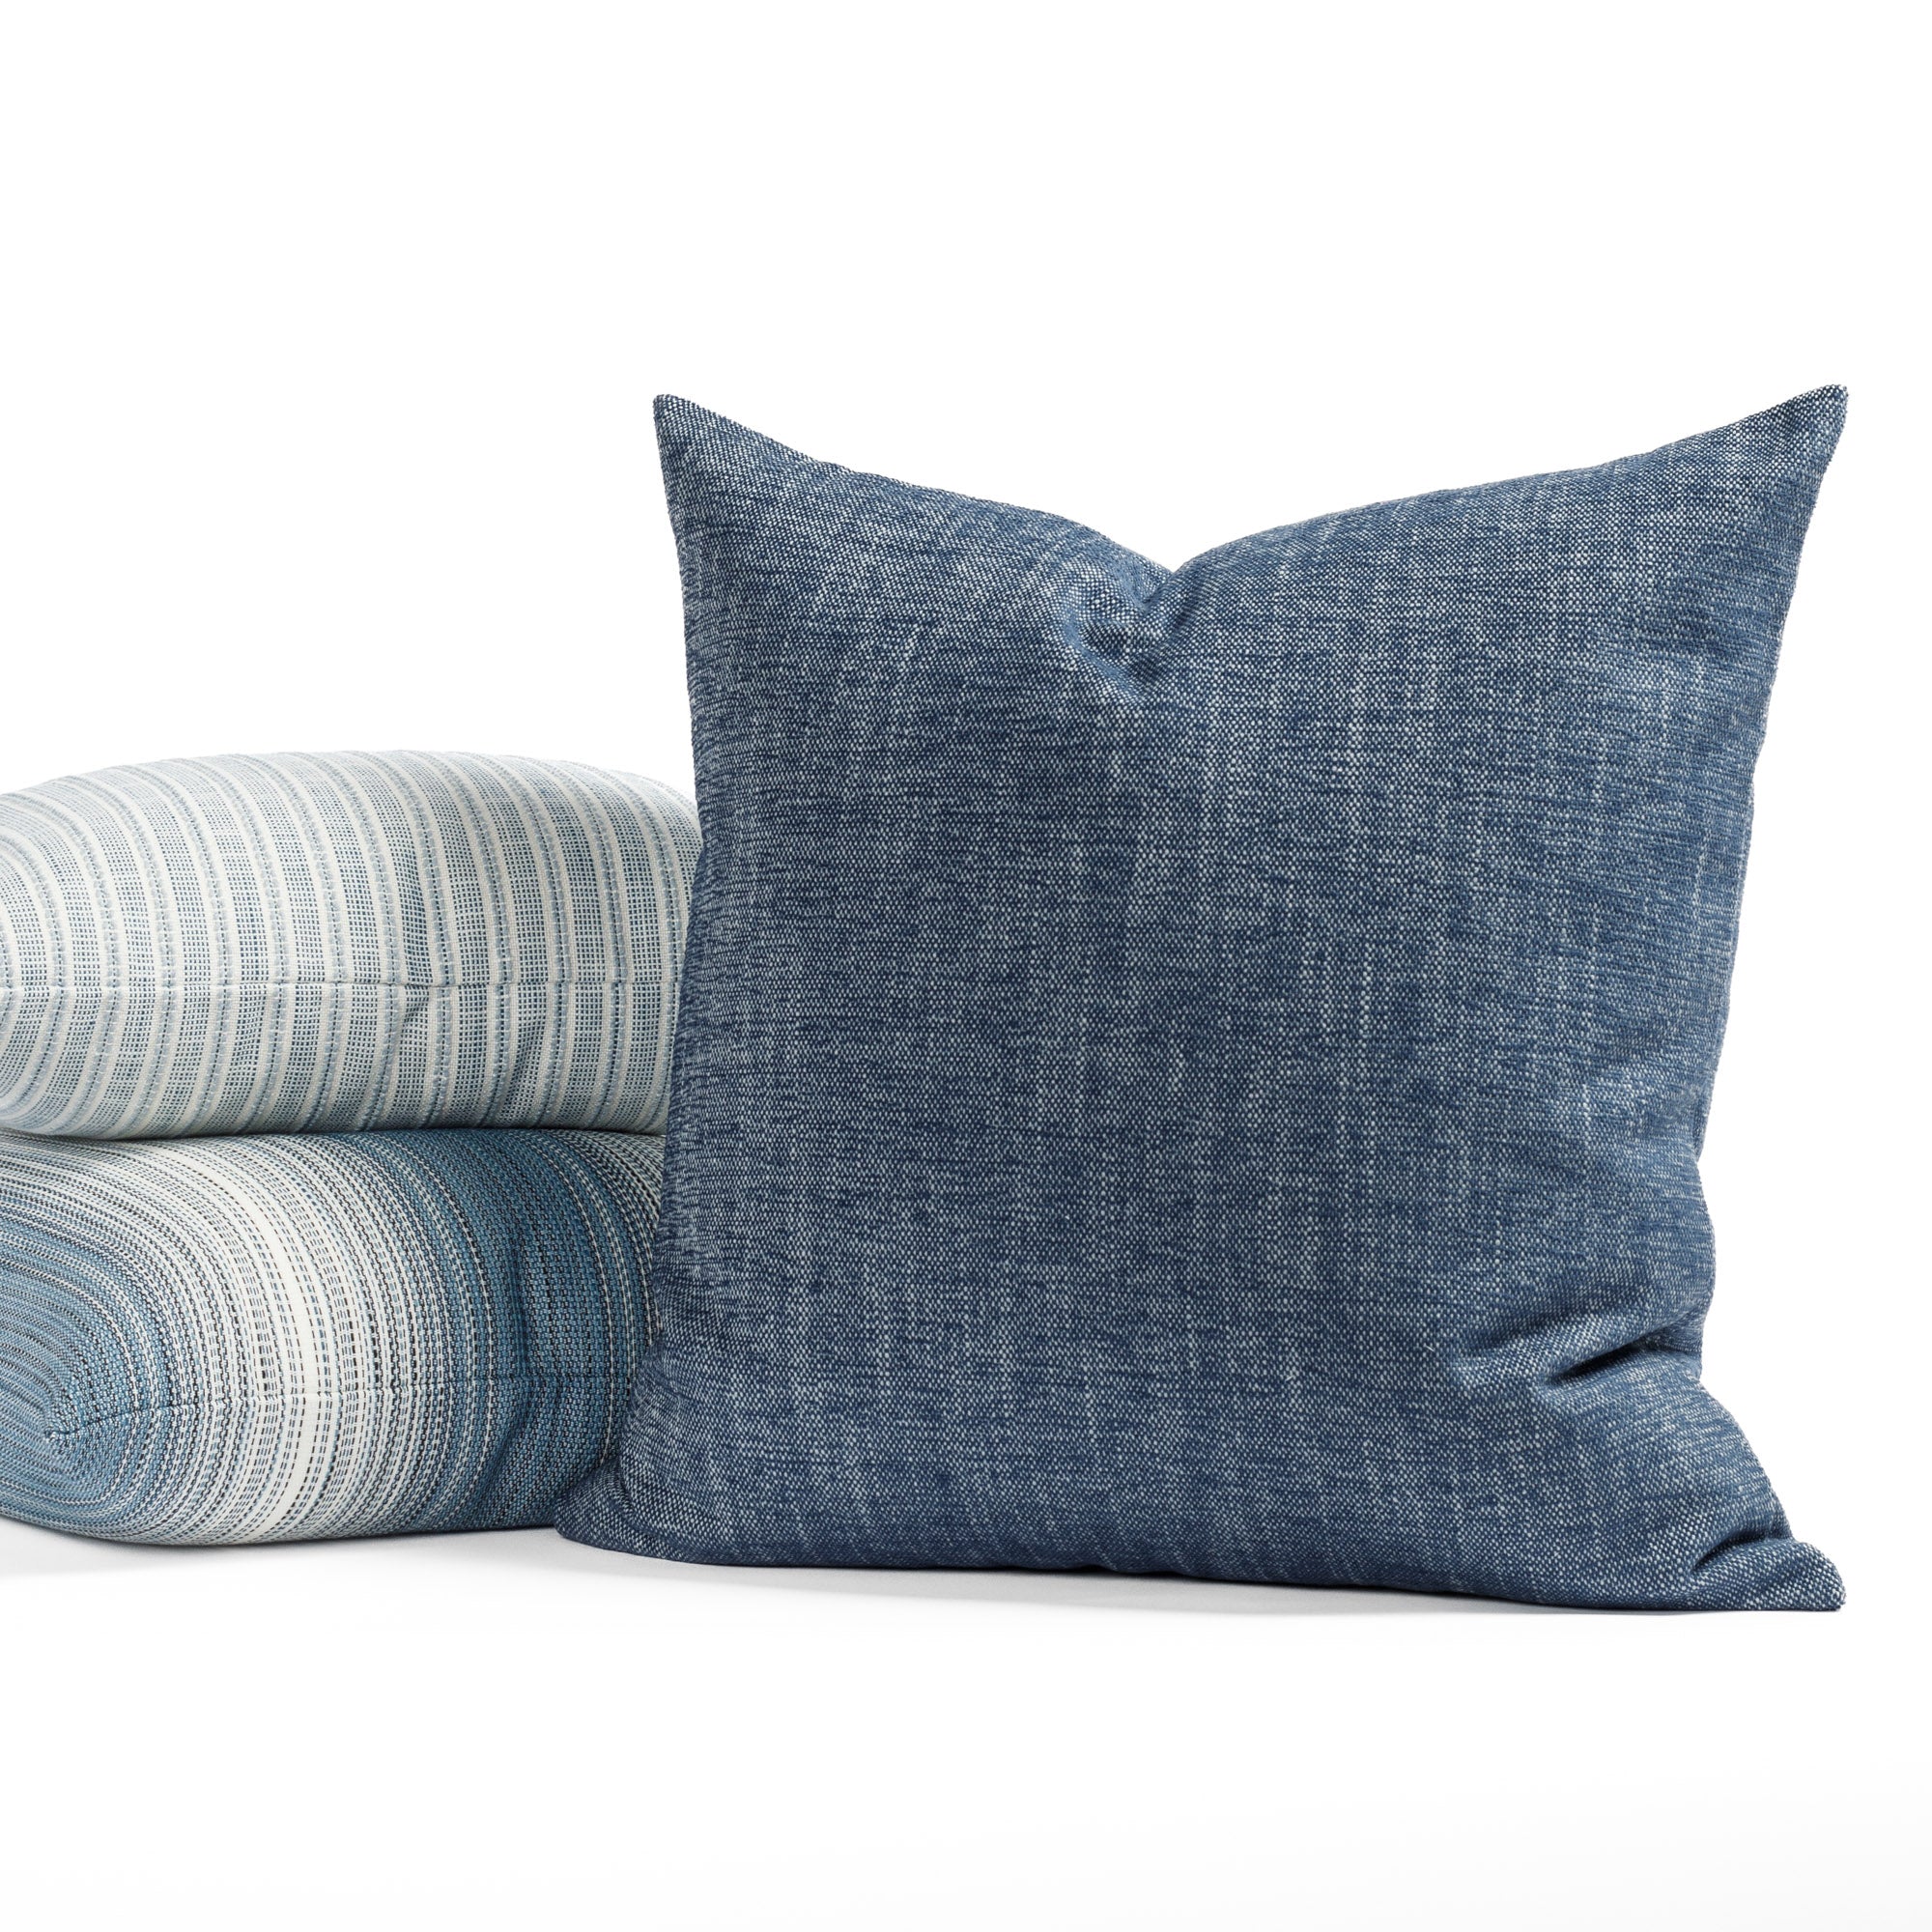 Tonic Living blue and white outdoor throw pillows